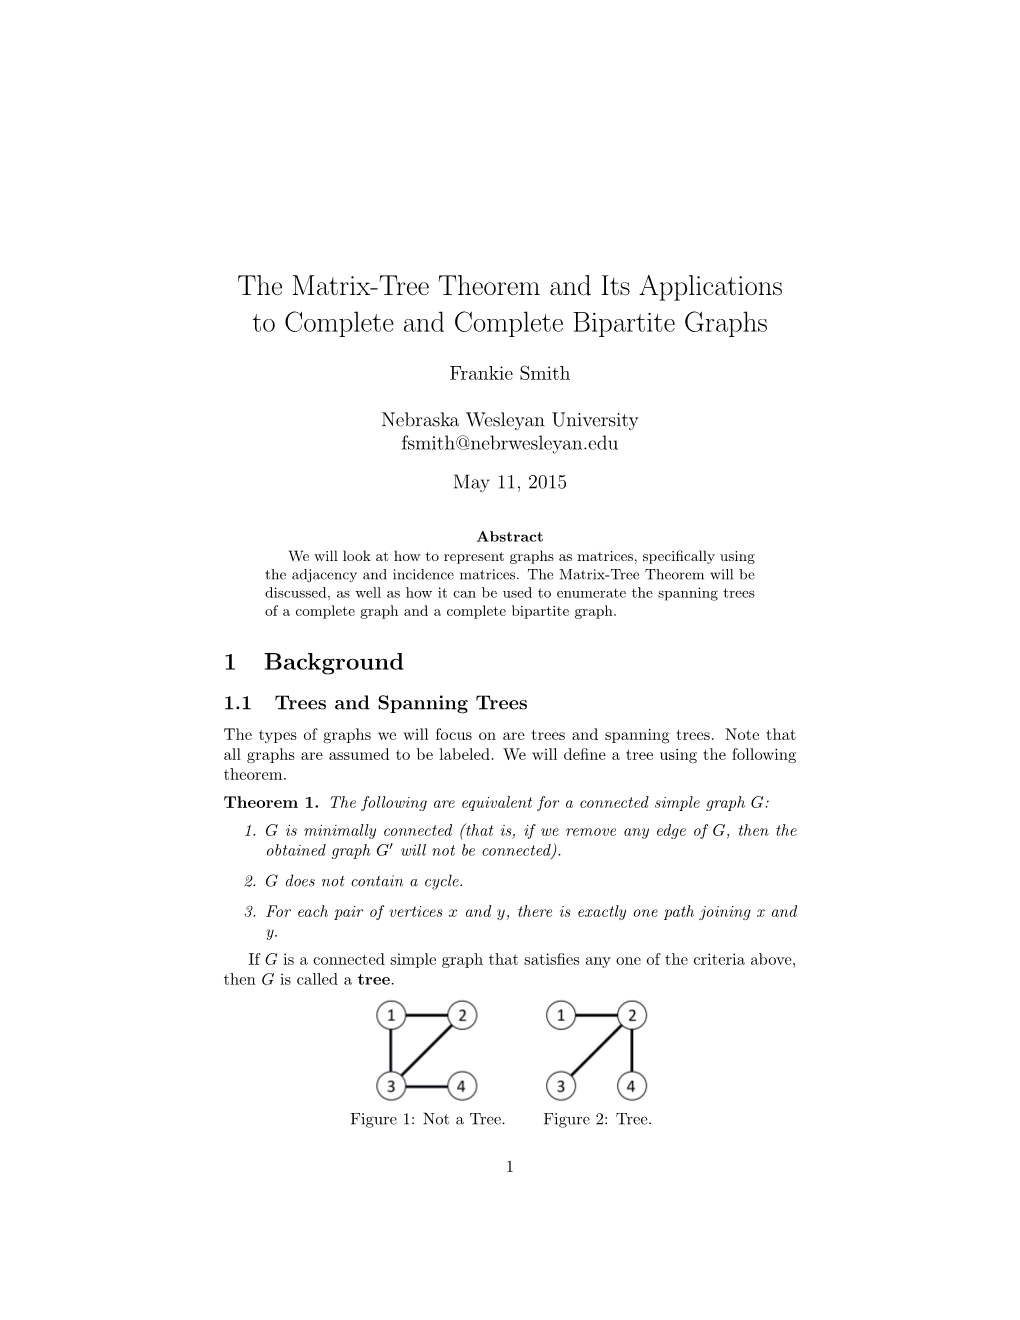 The Matrix-Tree Theorem and Its Applications to Complete and Complete Bipartite Graphs